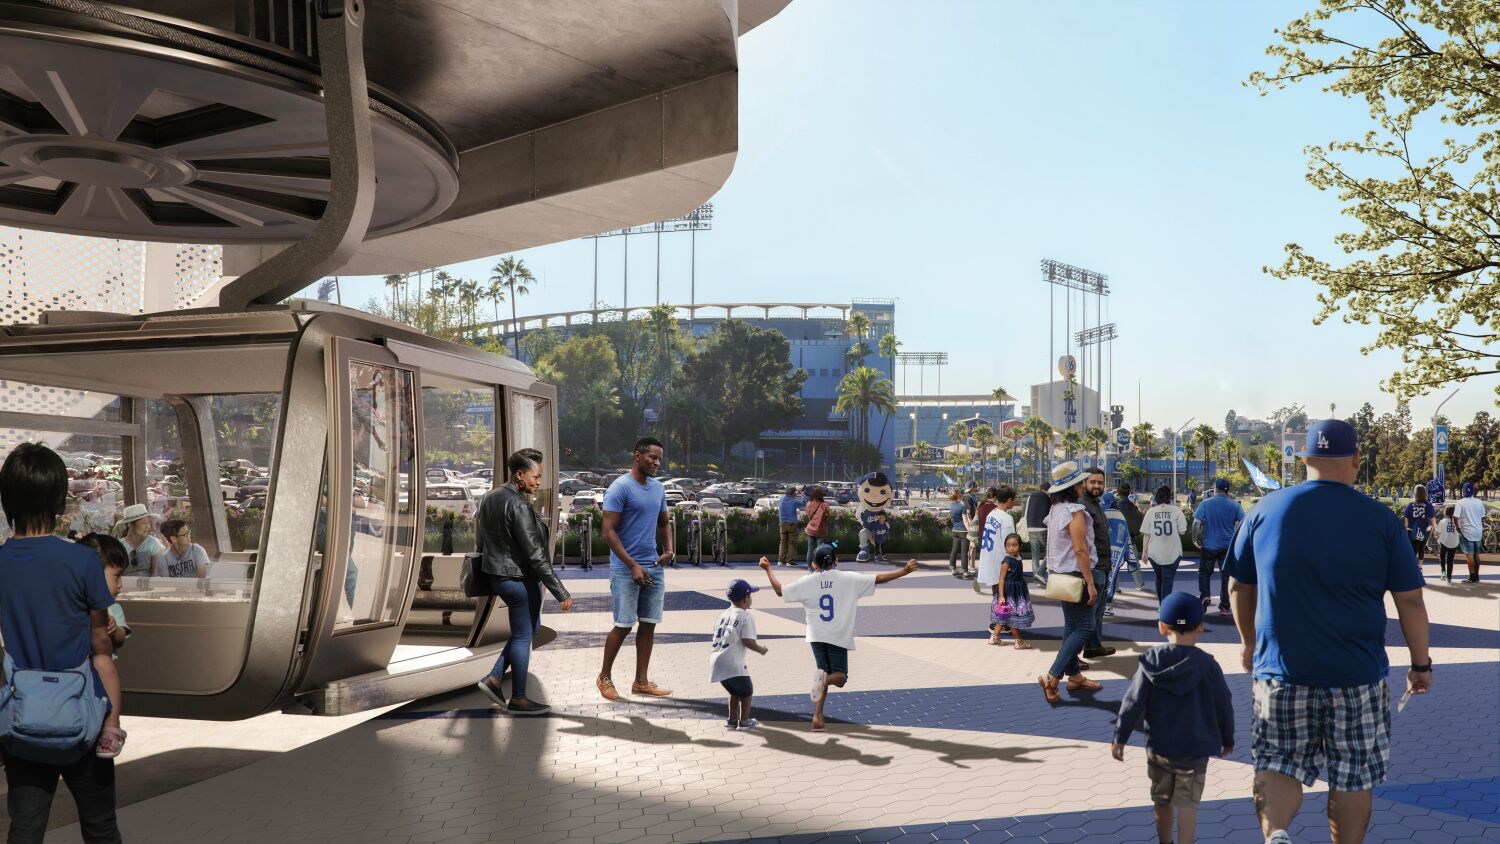 A gondola to Dodger Stadium? 'Repulsive,' 'something doesn't add up,' readers say